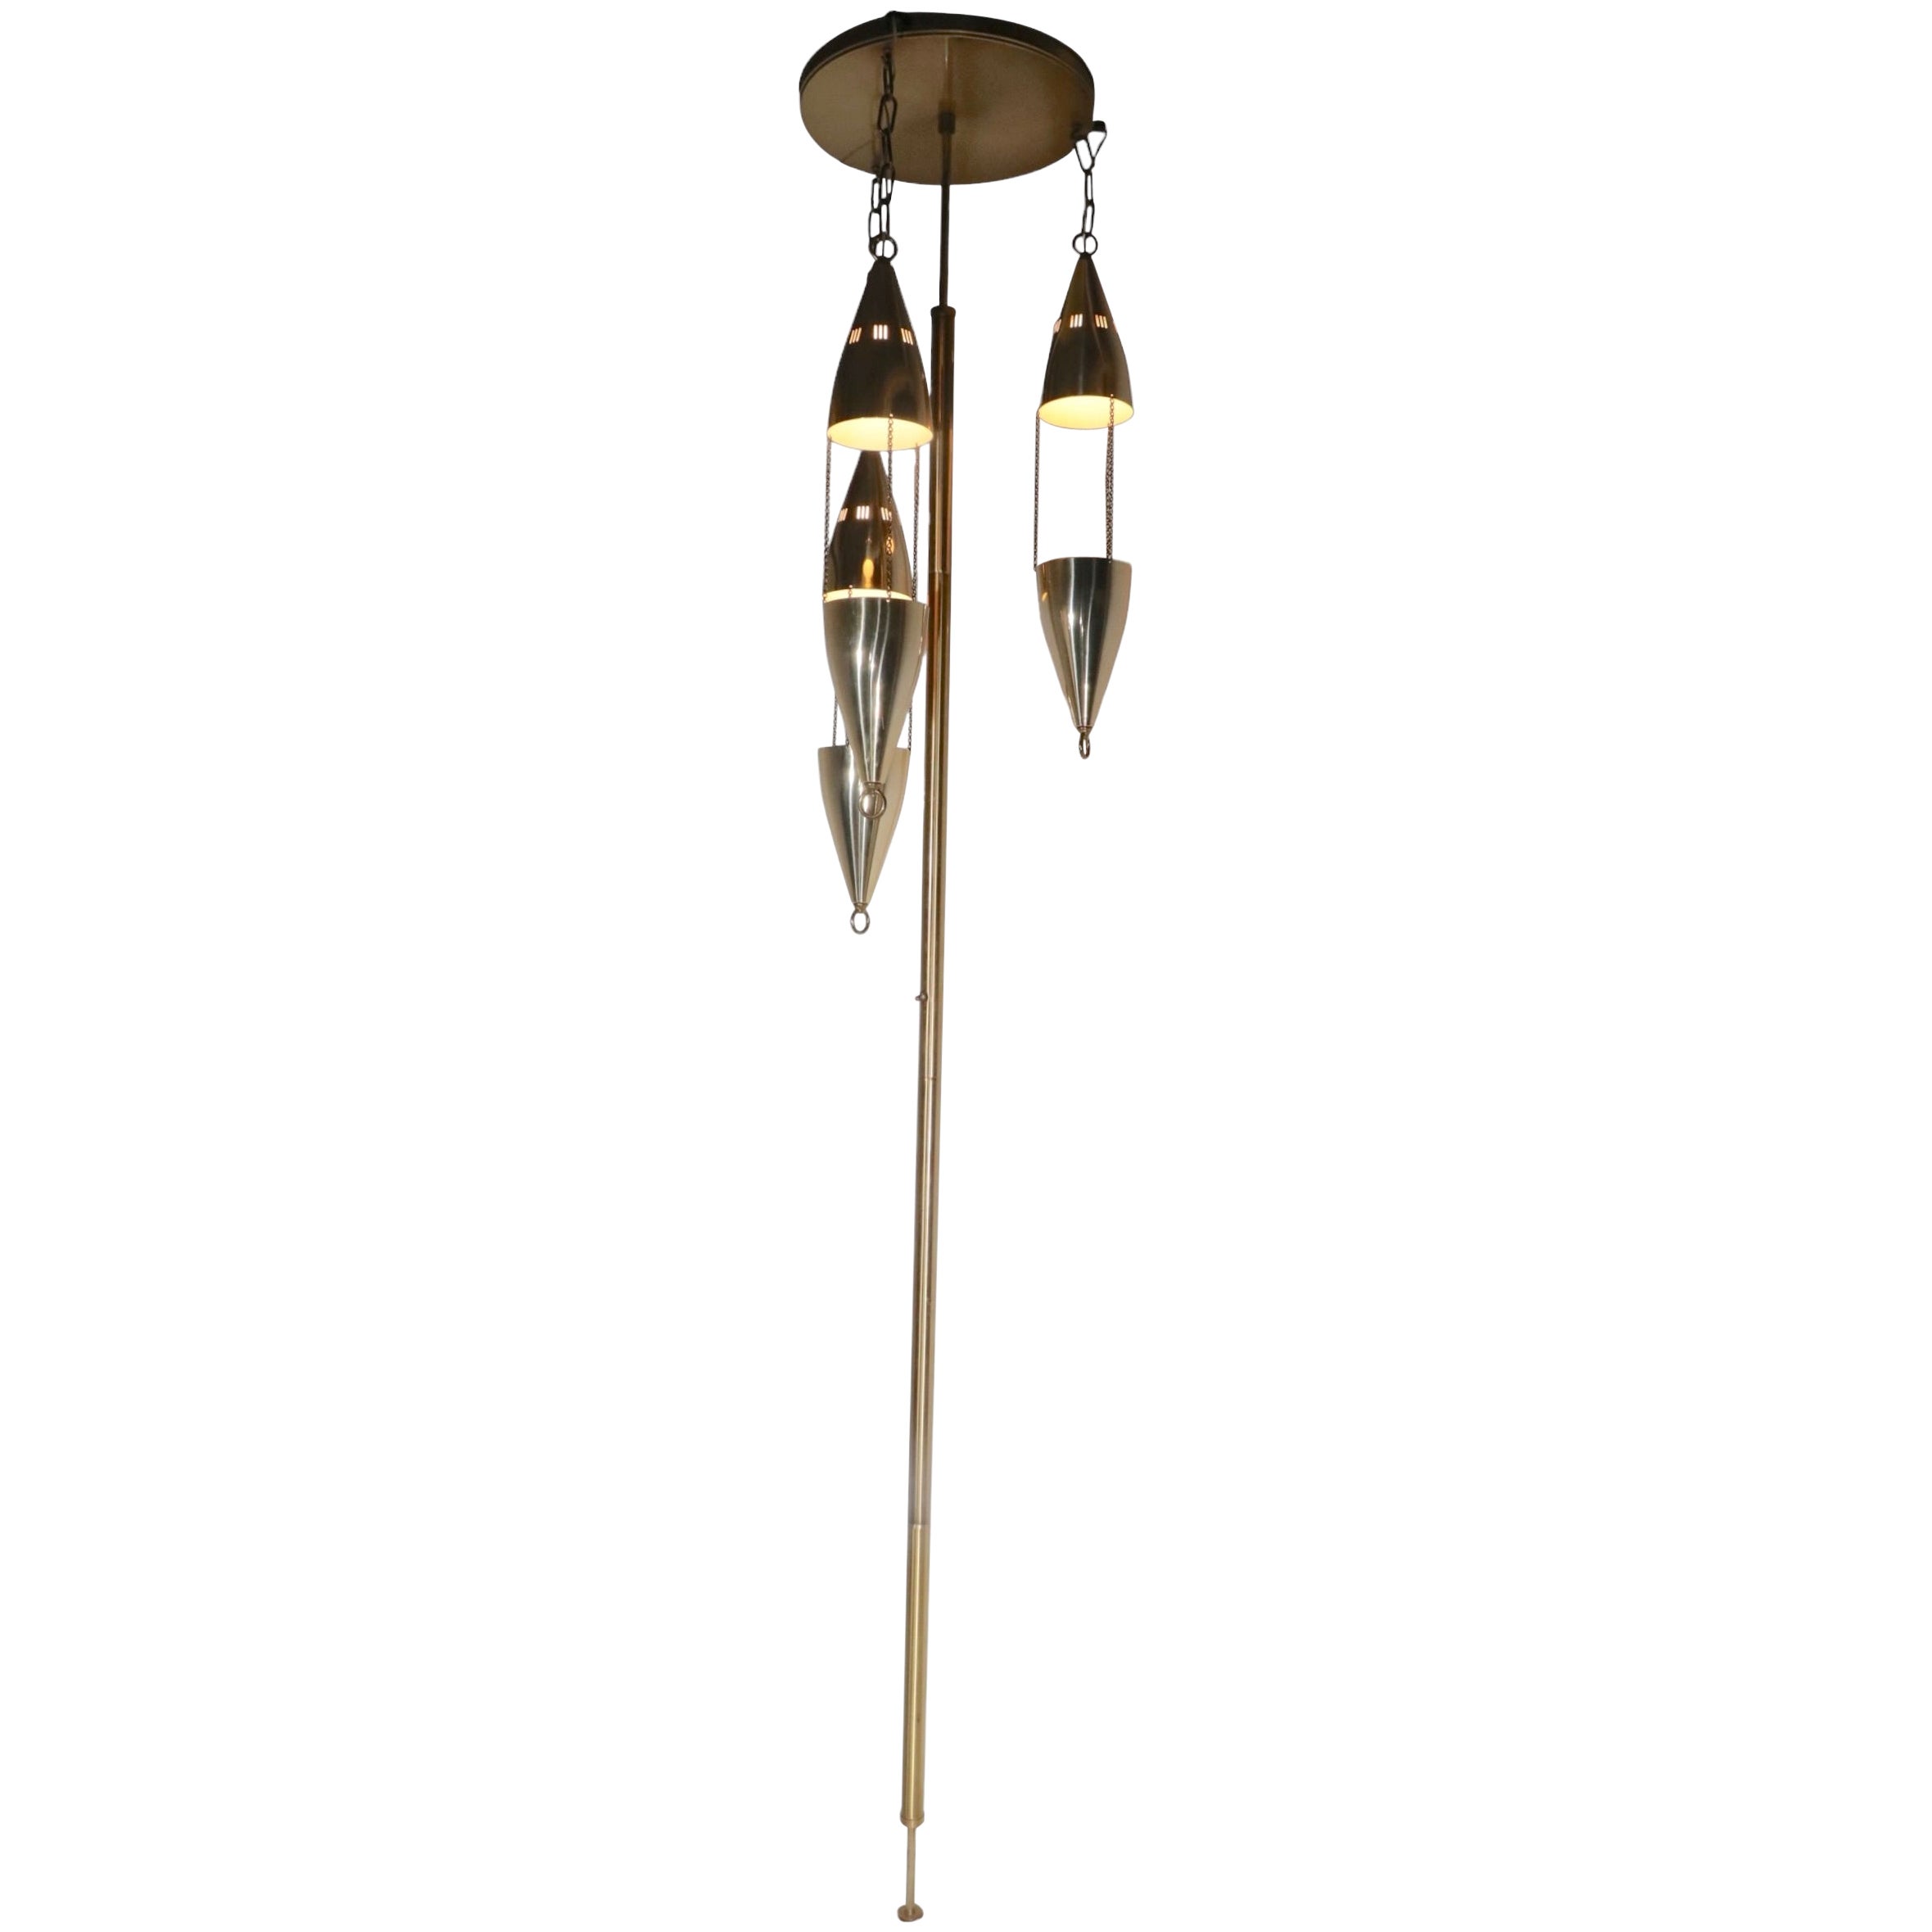 Architectural Mid Century Tension Pole Lamp c 1950- 1960's